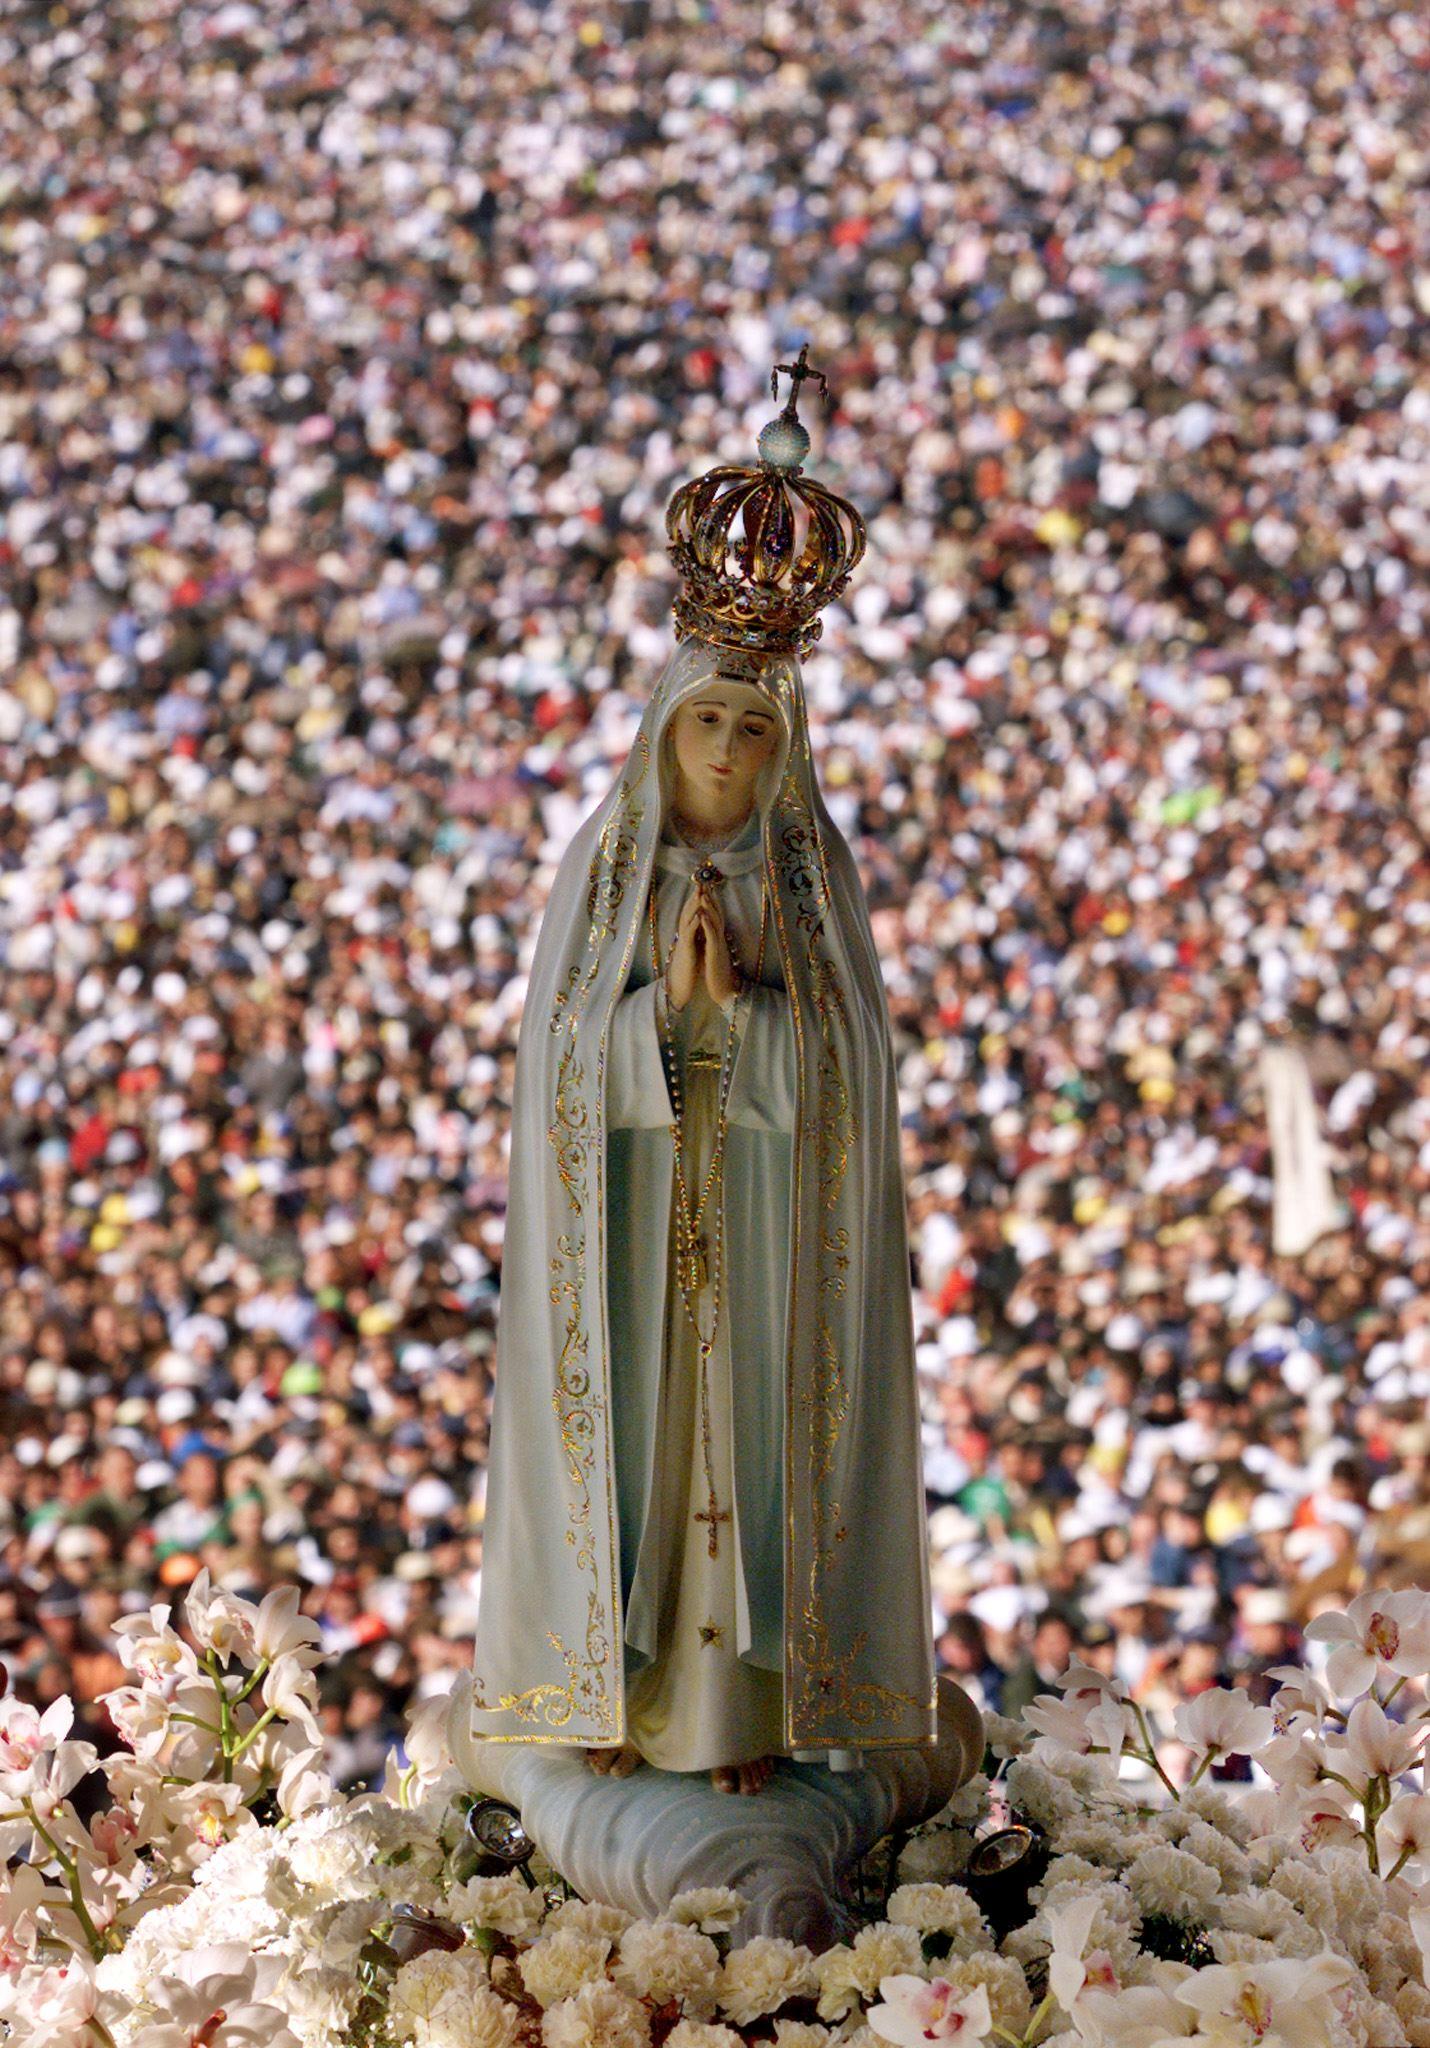 FATIMA, PORTUGAL: General view of the crowd with a statue of the Virgin of Fatima 13 May 2000, as Pope John Paul II celebrates the mass of beatification of the two dead shepherds children, Jacinta and Francisco Marto in Fatima. (GABRIEL BOUYS/AFP via Getty Images)